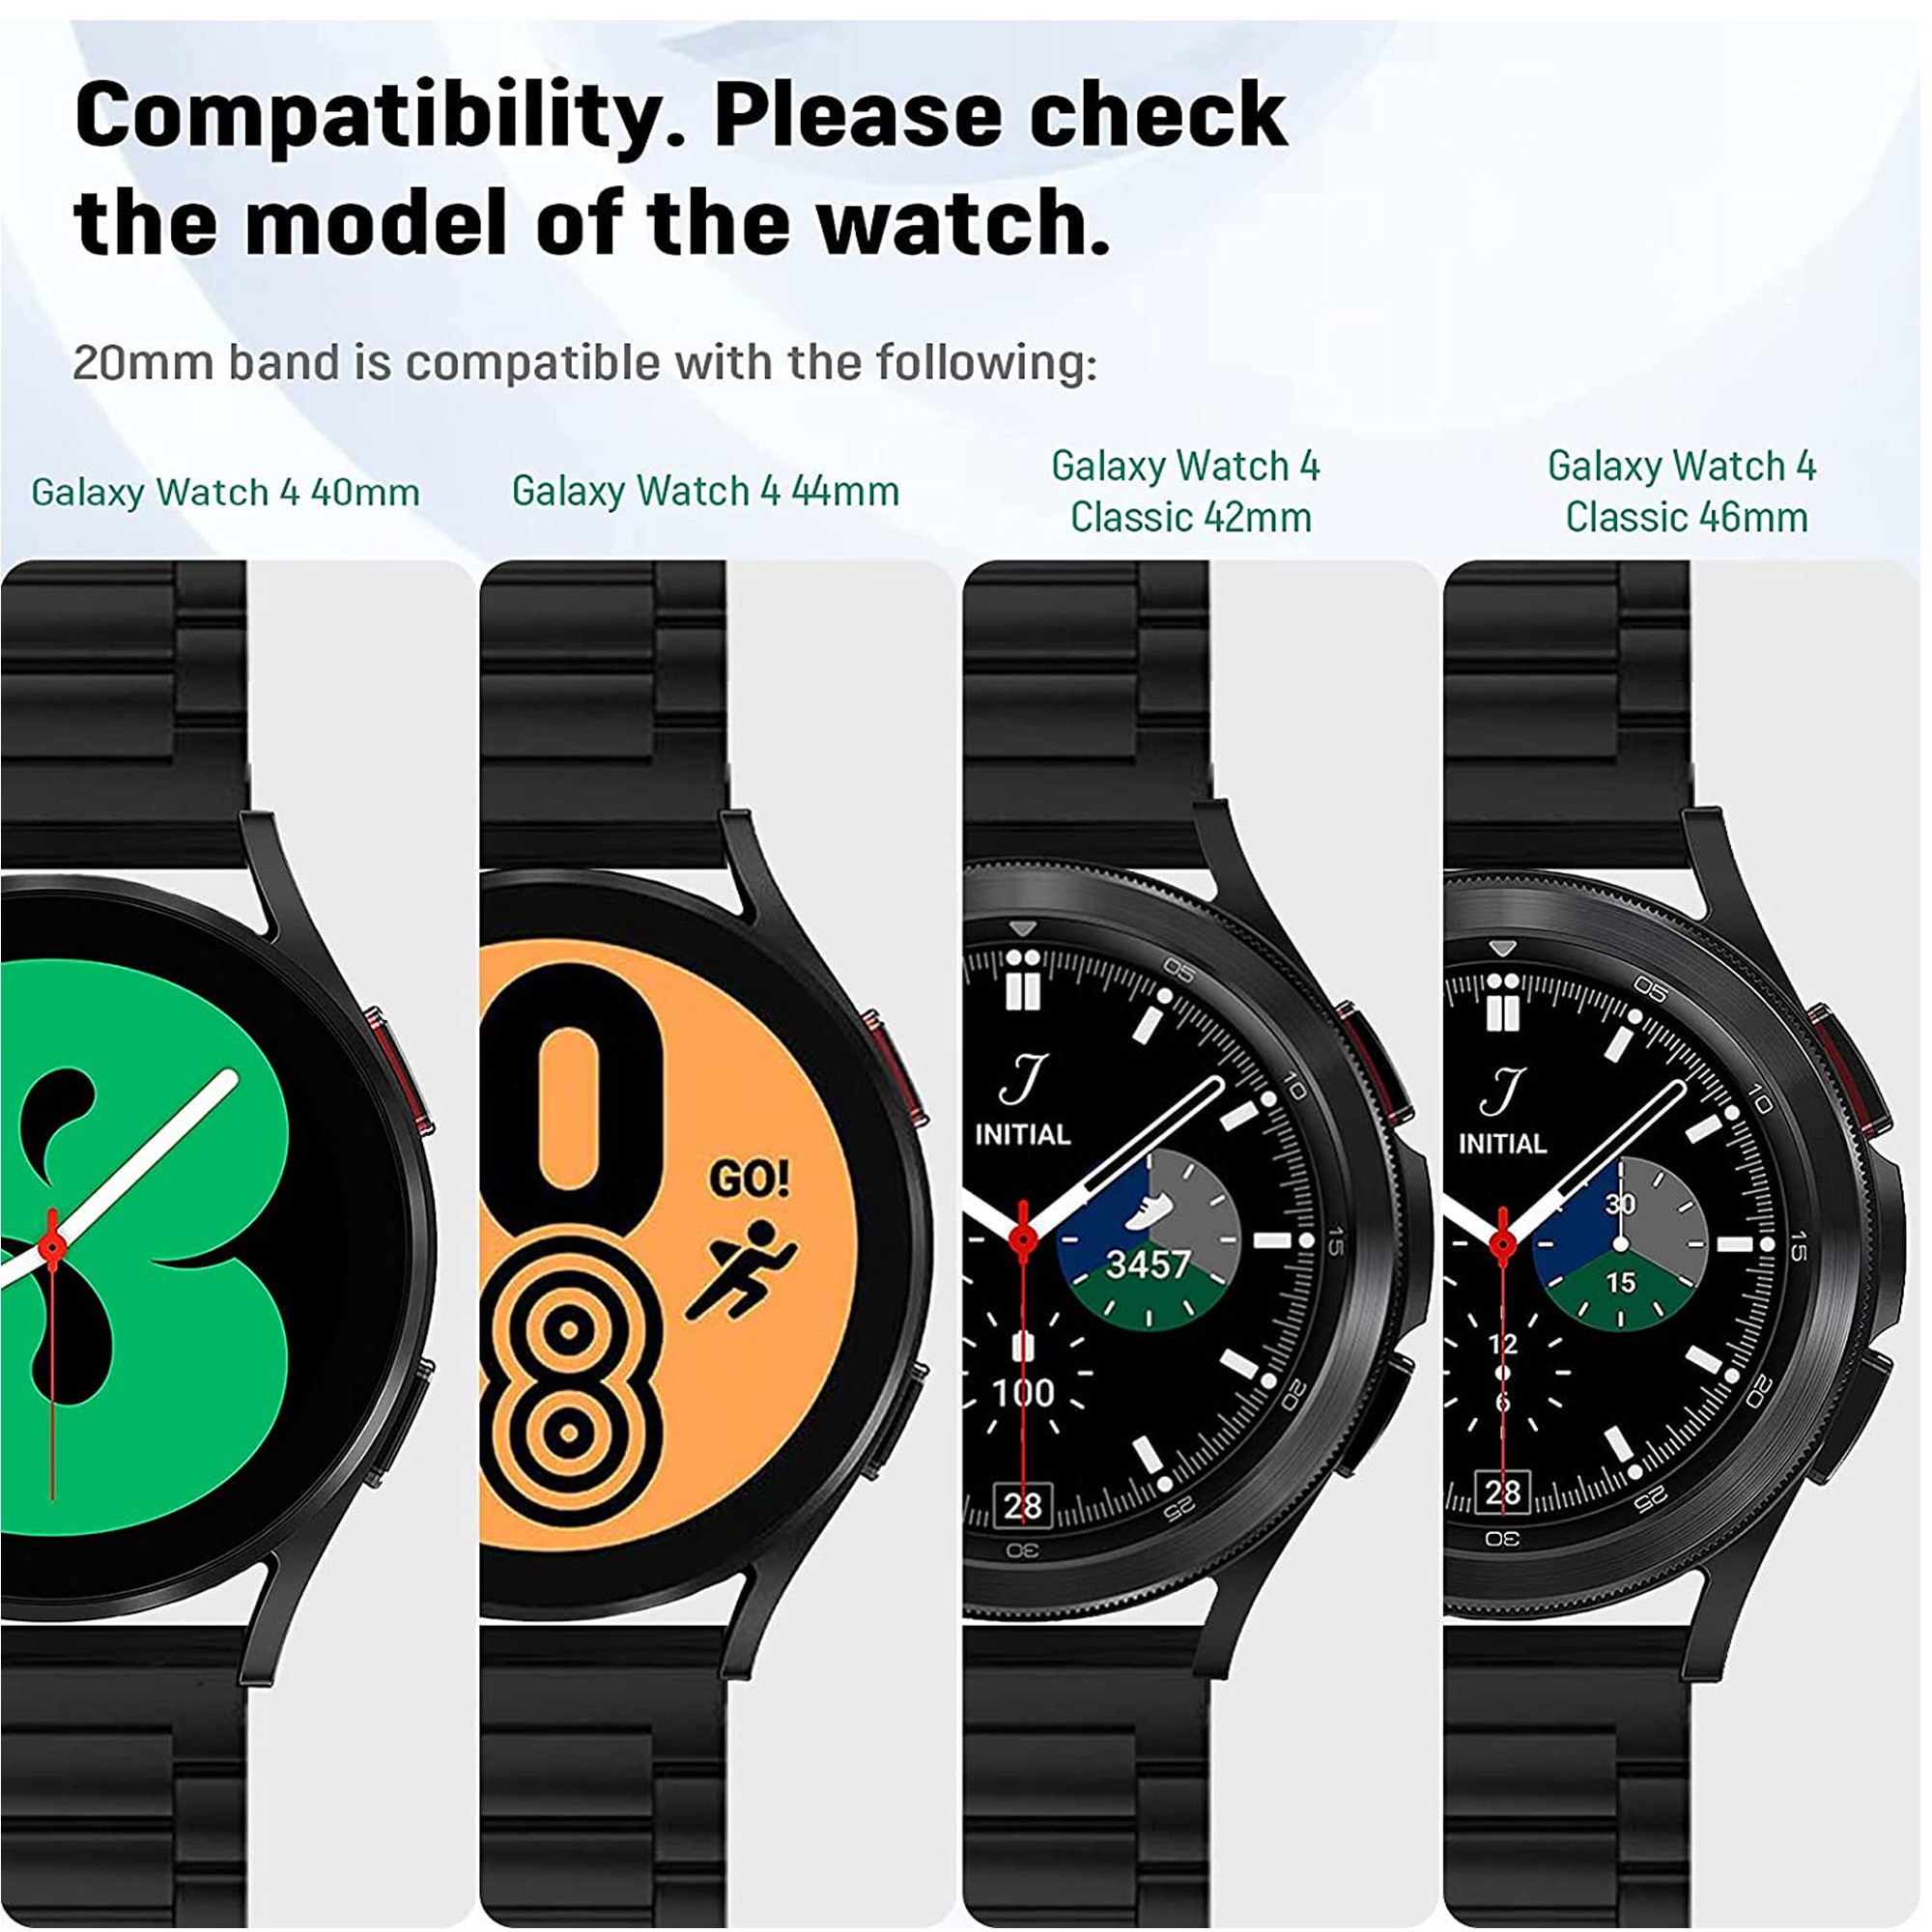 20mm/22mm watch strap for samsung gear s3 galaxy watch 4/4 classic 3/46mm/42mm/active 2 44mm 40mm band Huawei GT/GT2/2e/Pro Band